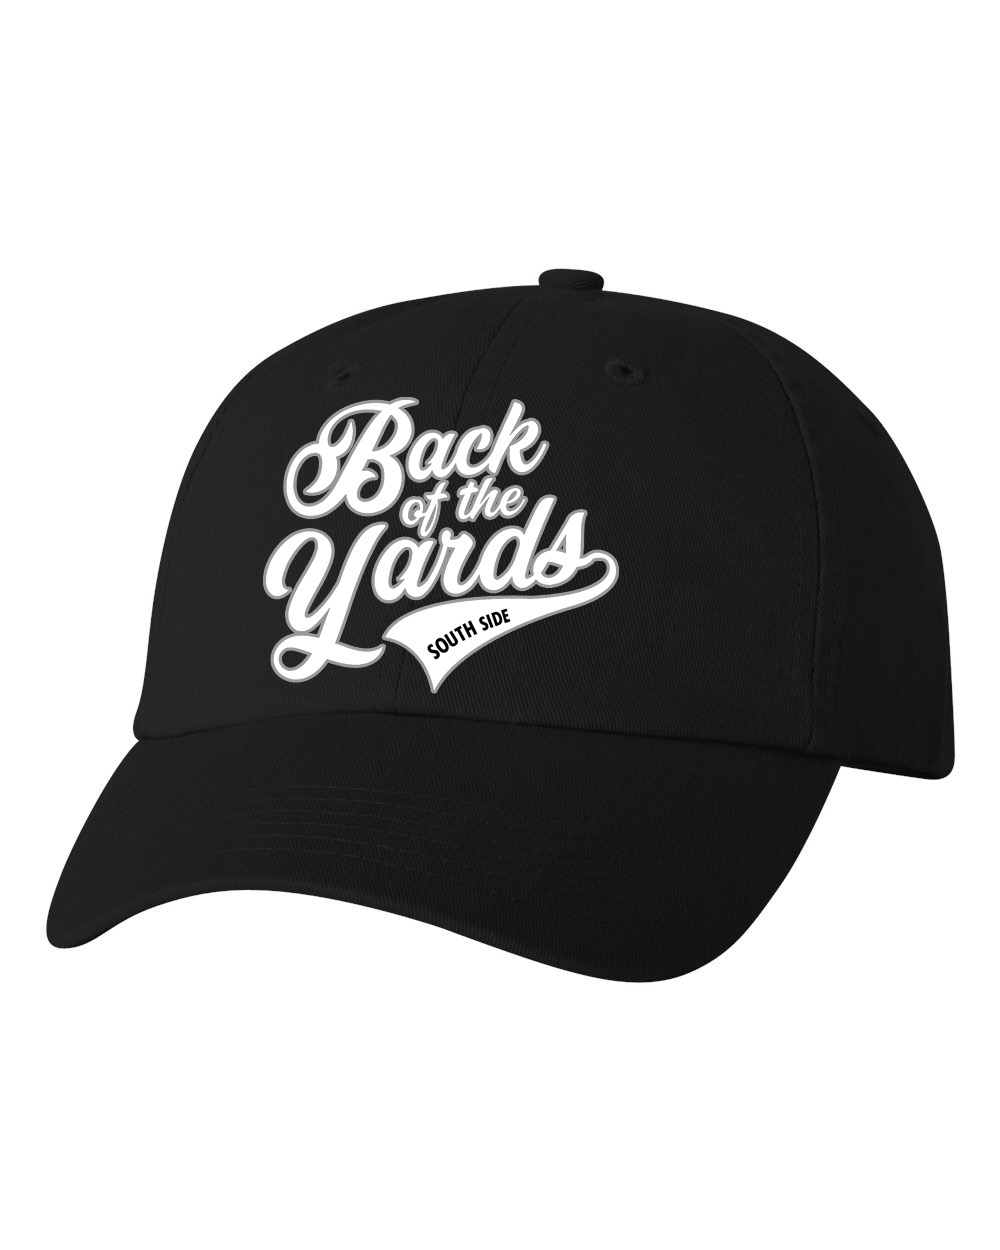 Back of the Yards Crosstown Inspired dad hat - Black